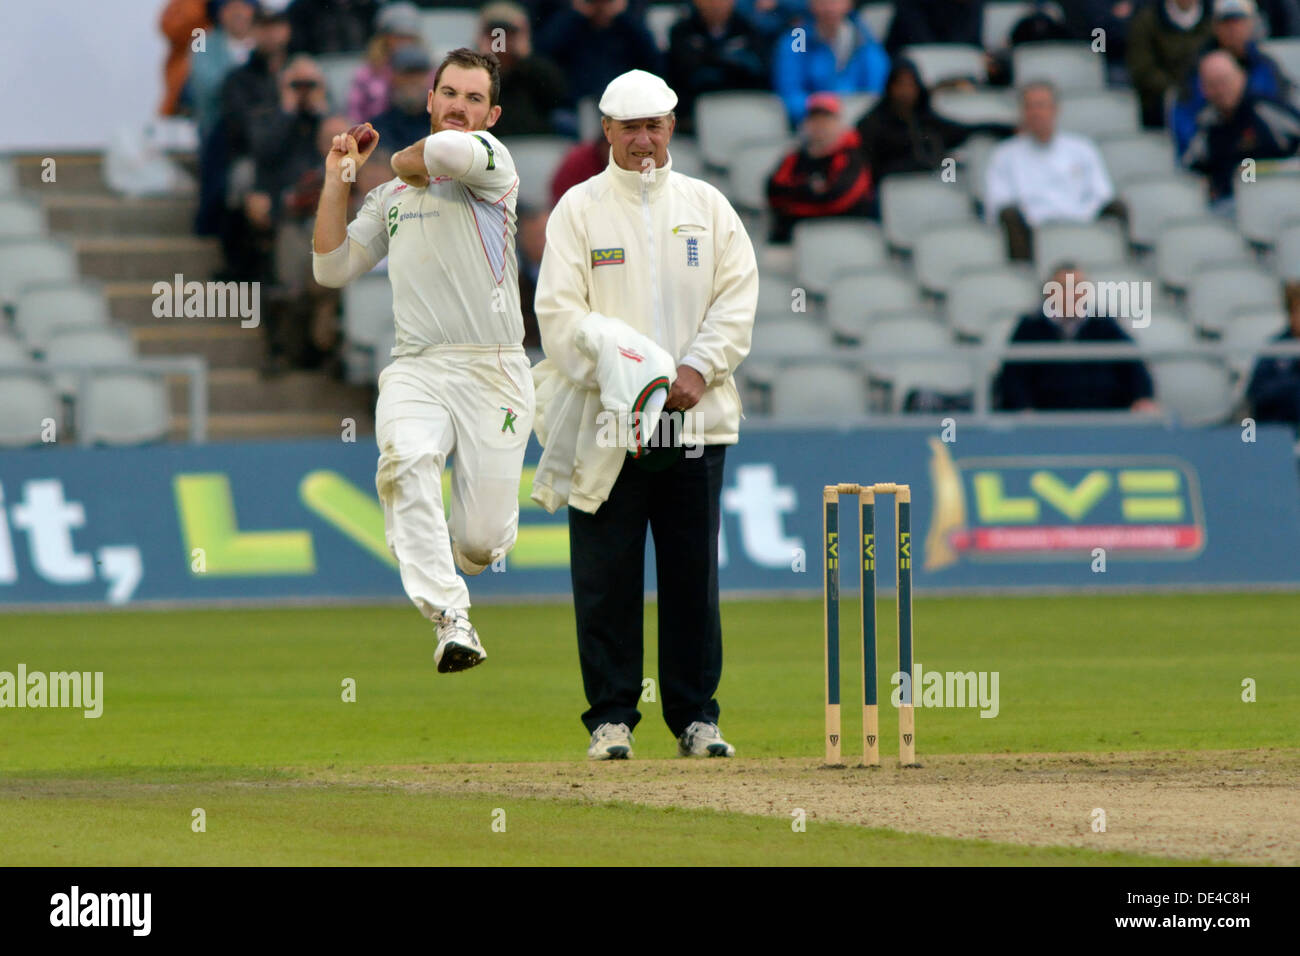 Old Trafford, Manchester, UK. 11th Sep, 2013. Ben Raine (Leicestershire) bowls during the first morning of the rain-affected Championship match against Lancashire. Lancashire v Leicestershire, Emirates Old Trafford, Manchester, UK  11 September 2013 Credit:  John Fryer/Alamy Live News Stock Photo